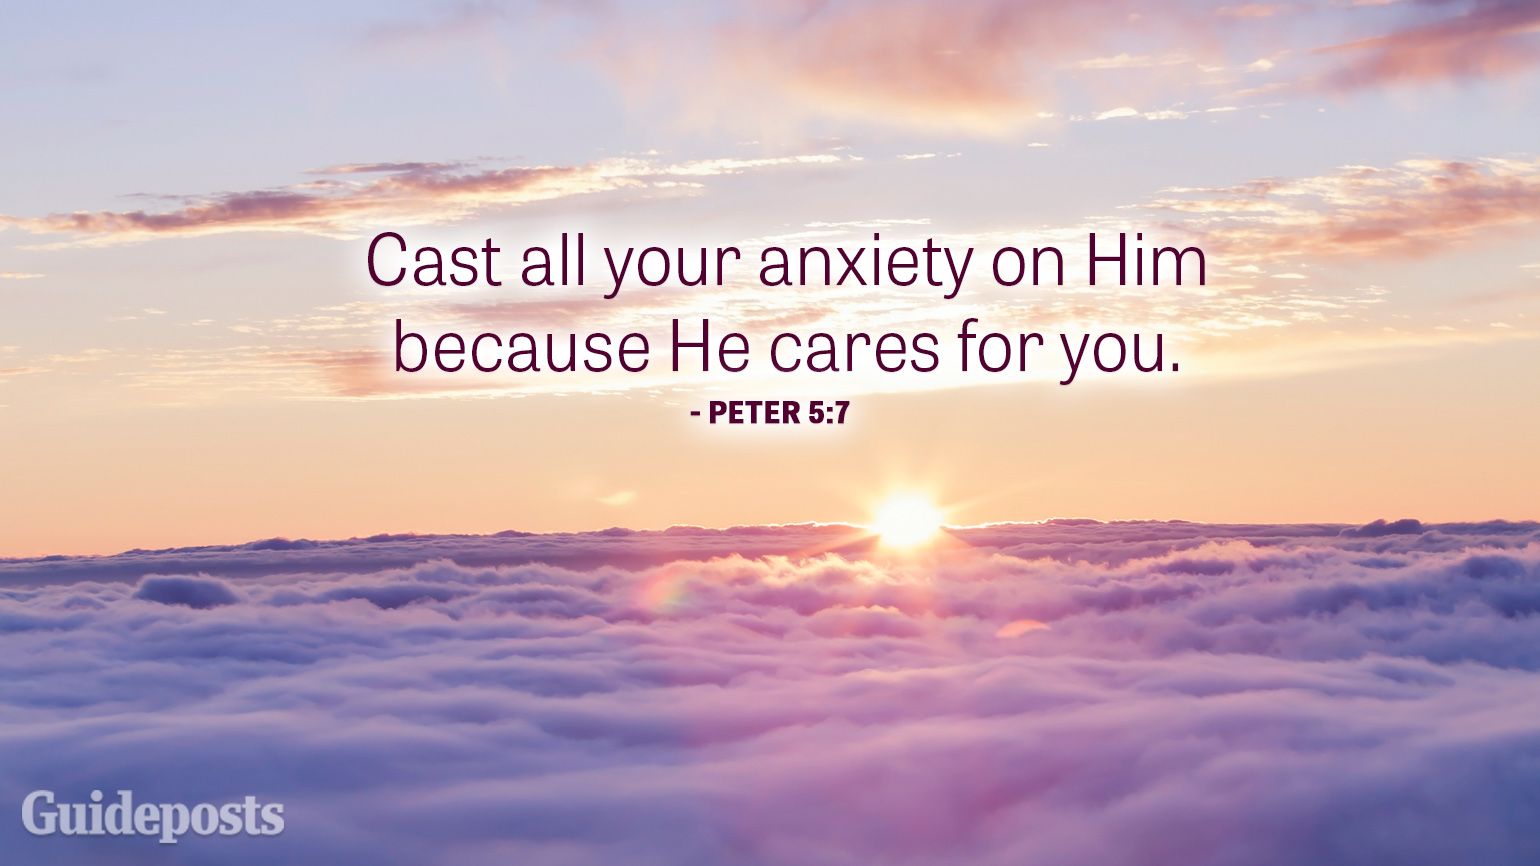 Cast all your anxiety on Him because He cares for you.